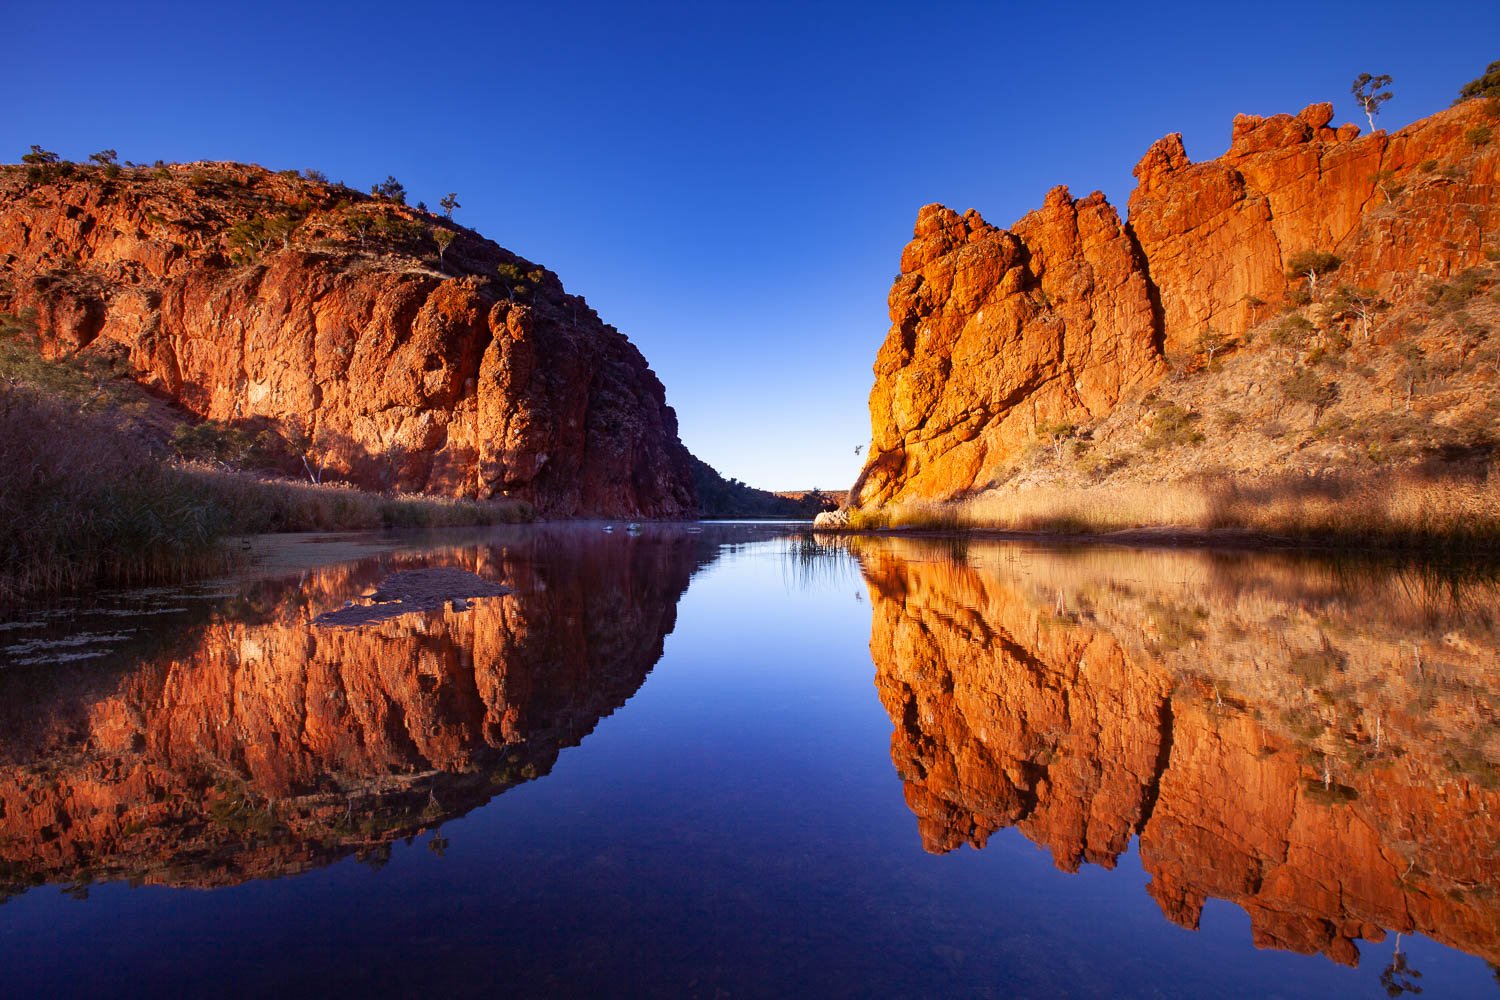 Reflection of two giant mountains in the lake, Glen Helen Gorge reflection, West MacDonnell Ranges - Northern Territory